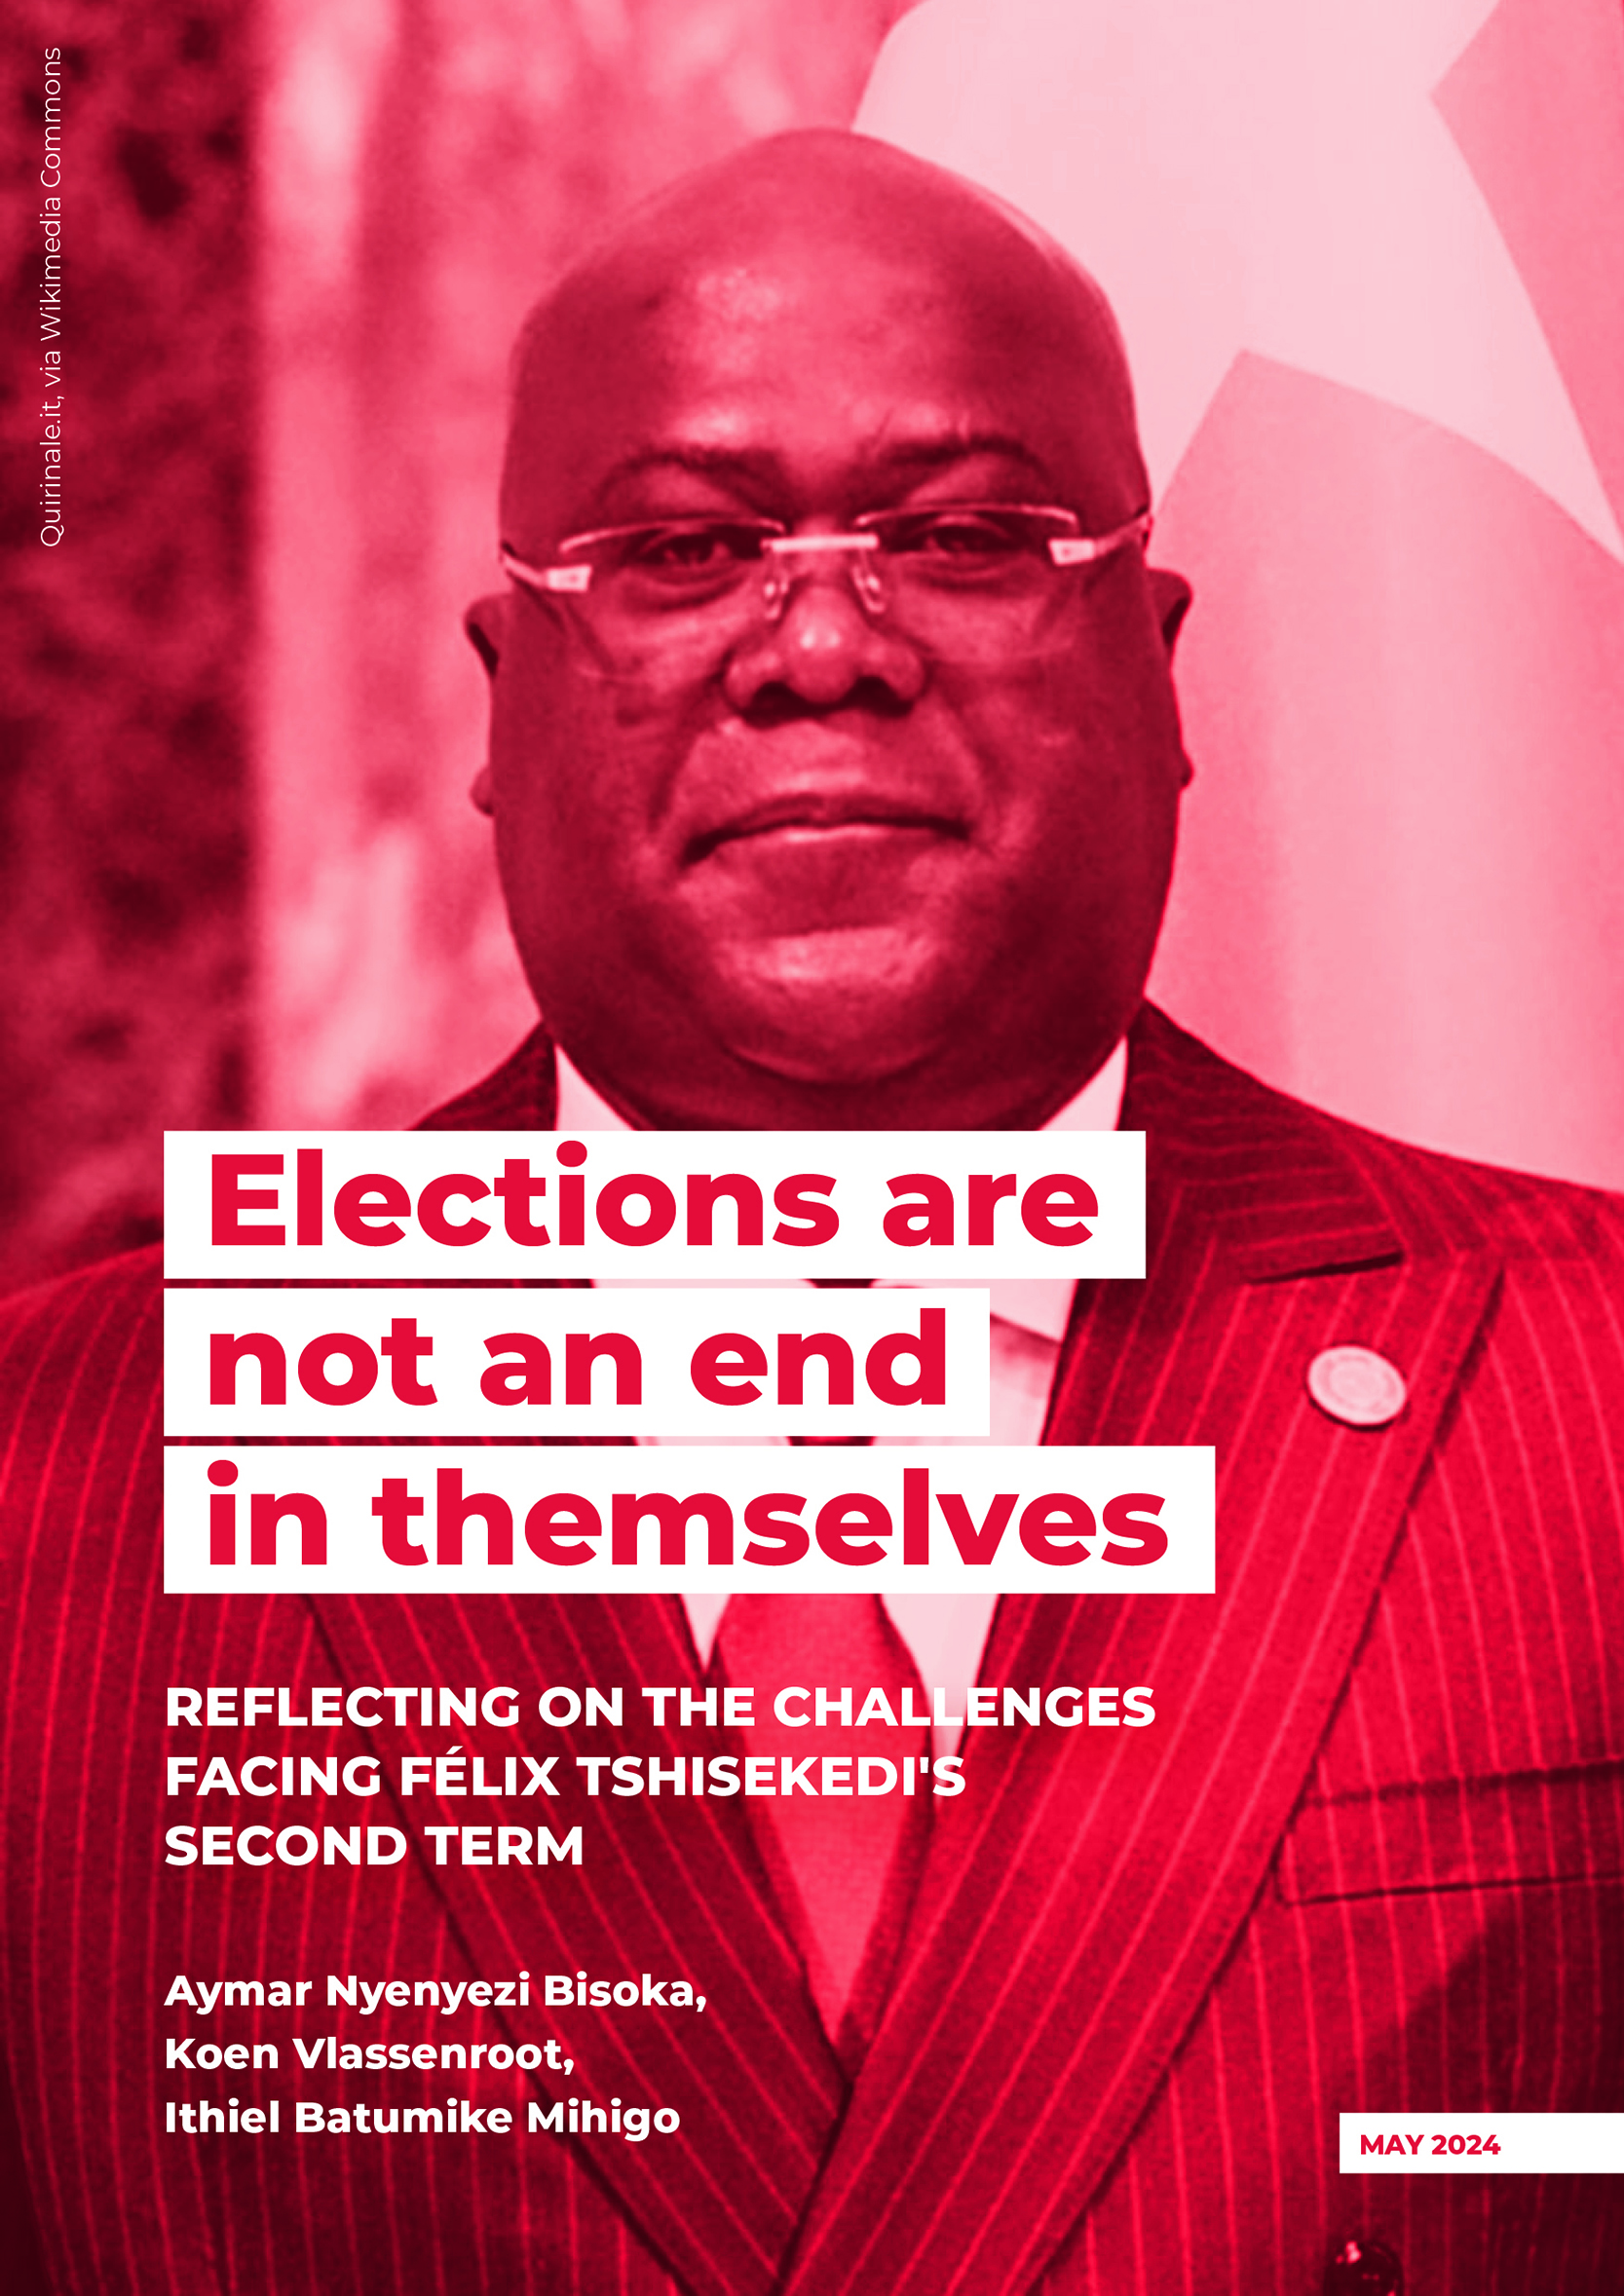 07_Elections are not an end in themselves_1